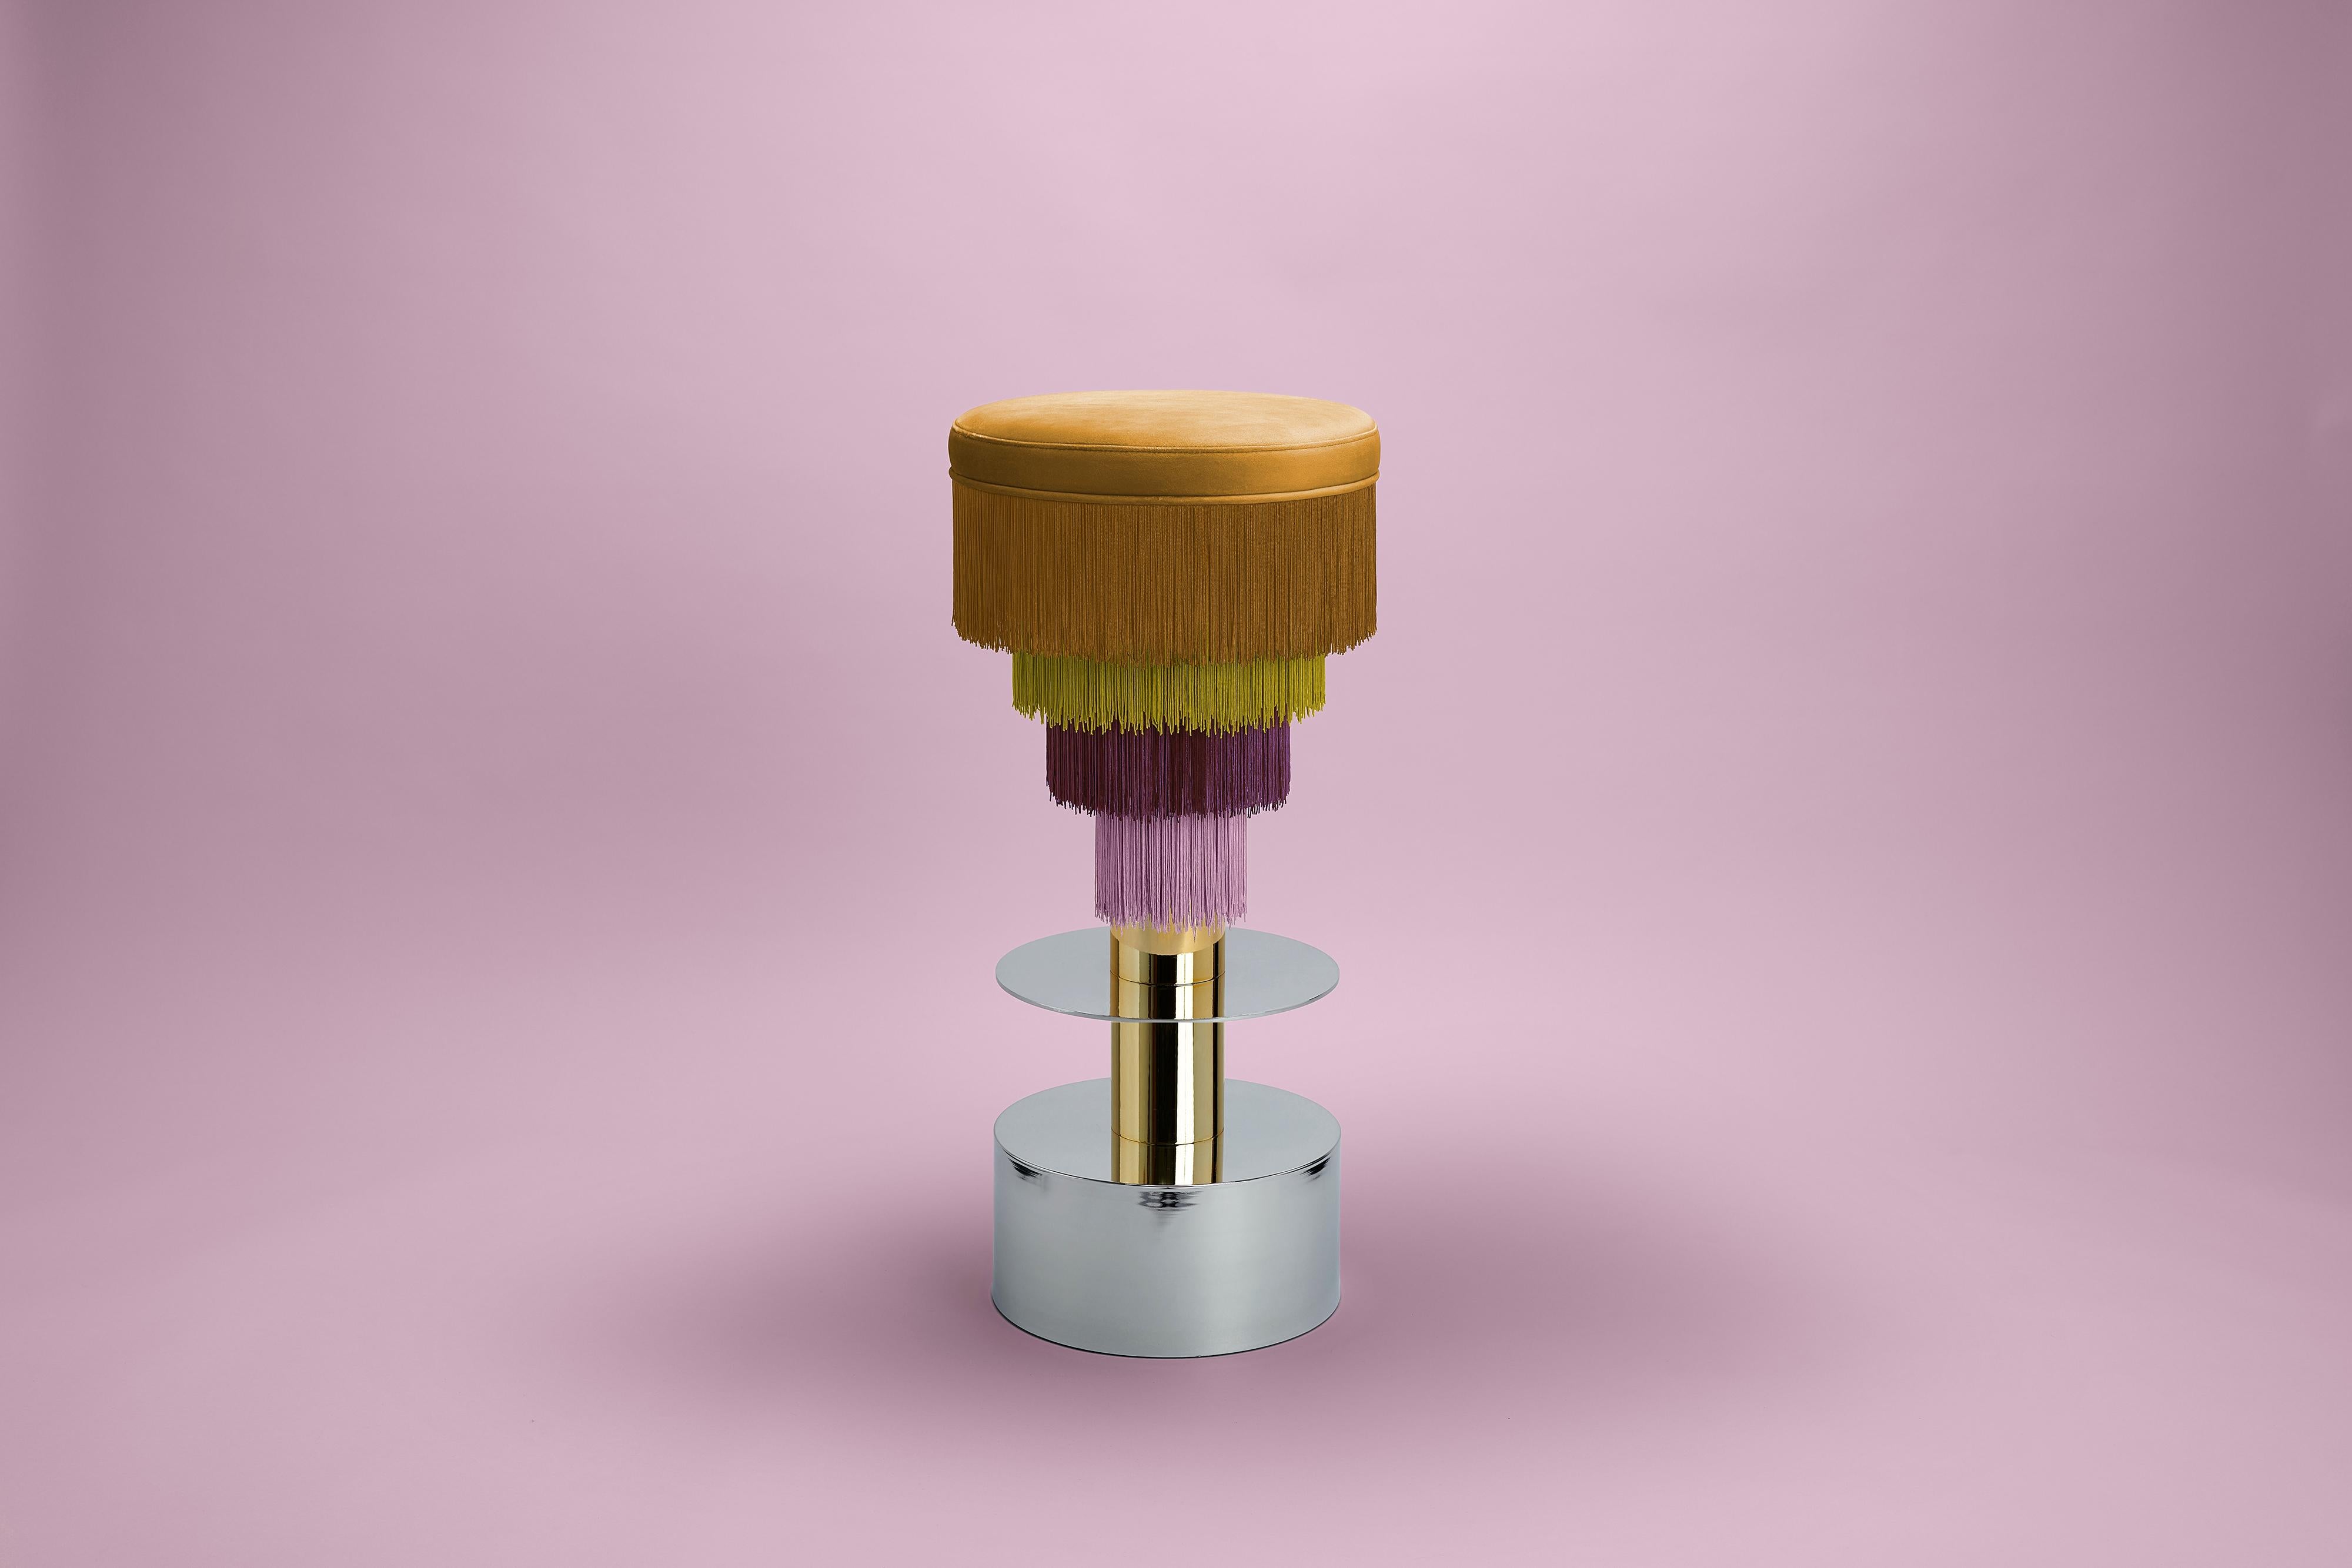 Deja Vu stool

Design by Masquespacio for Houtique

Seat made of particleboard with fire retardant 35 kg Tead rubber

Circular base and metallic footrest covered in chrome

24-karat gold-plated metal center tube

Dimensions: 35 cm x 75 cm